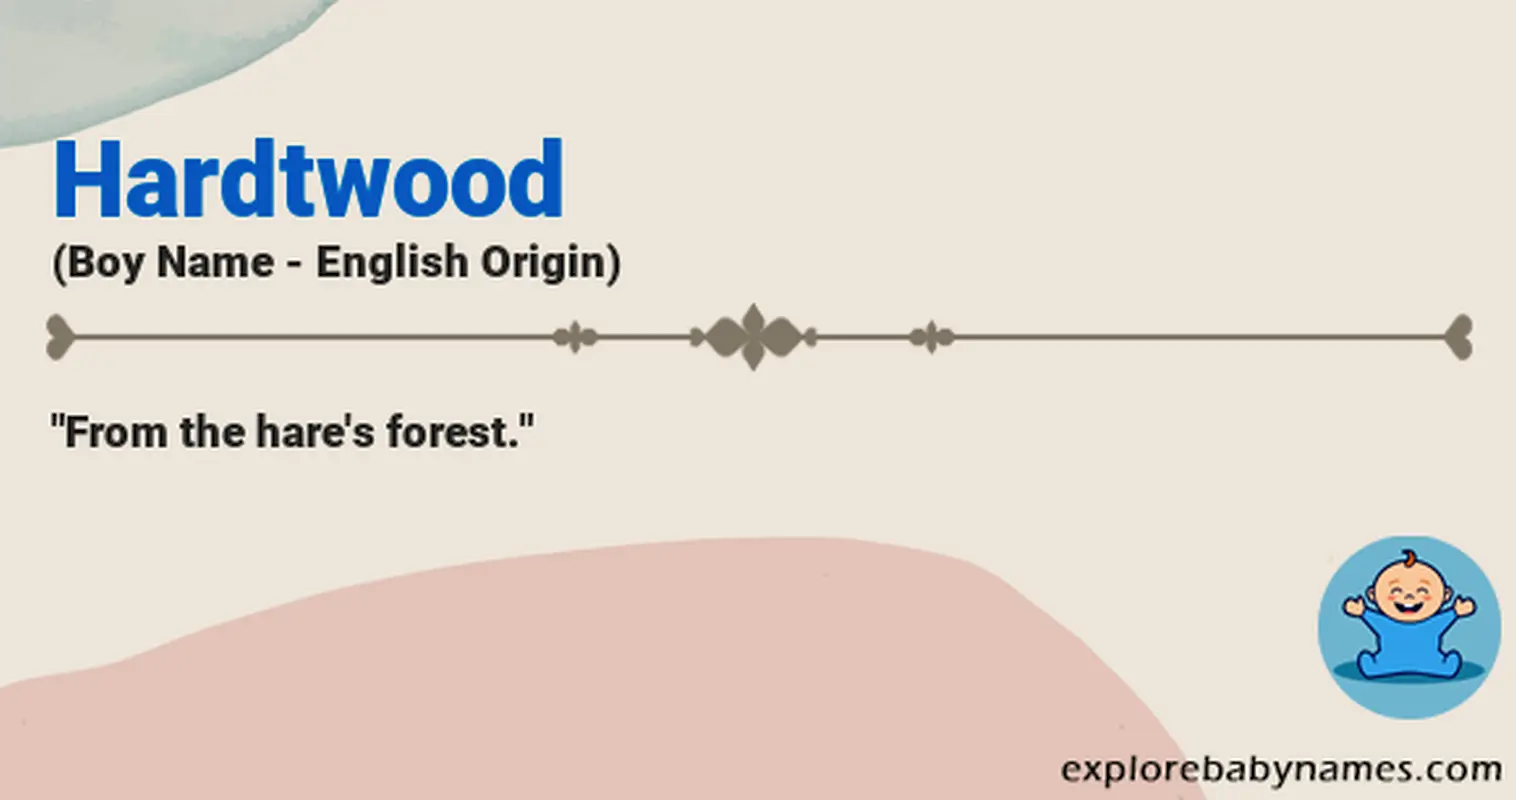 Meaning of Hardtwood